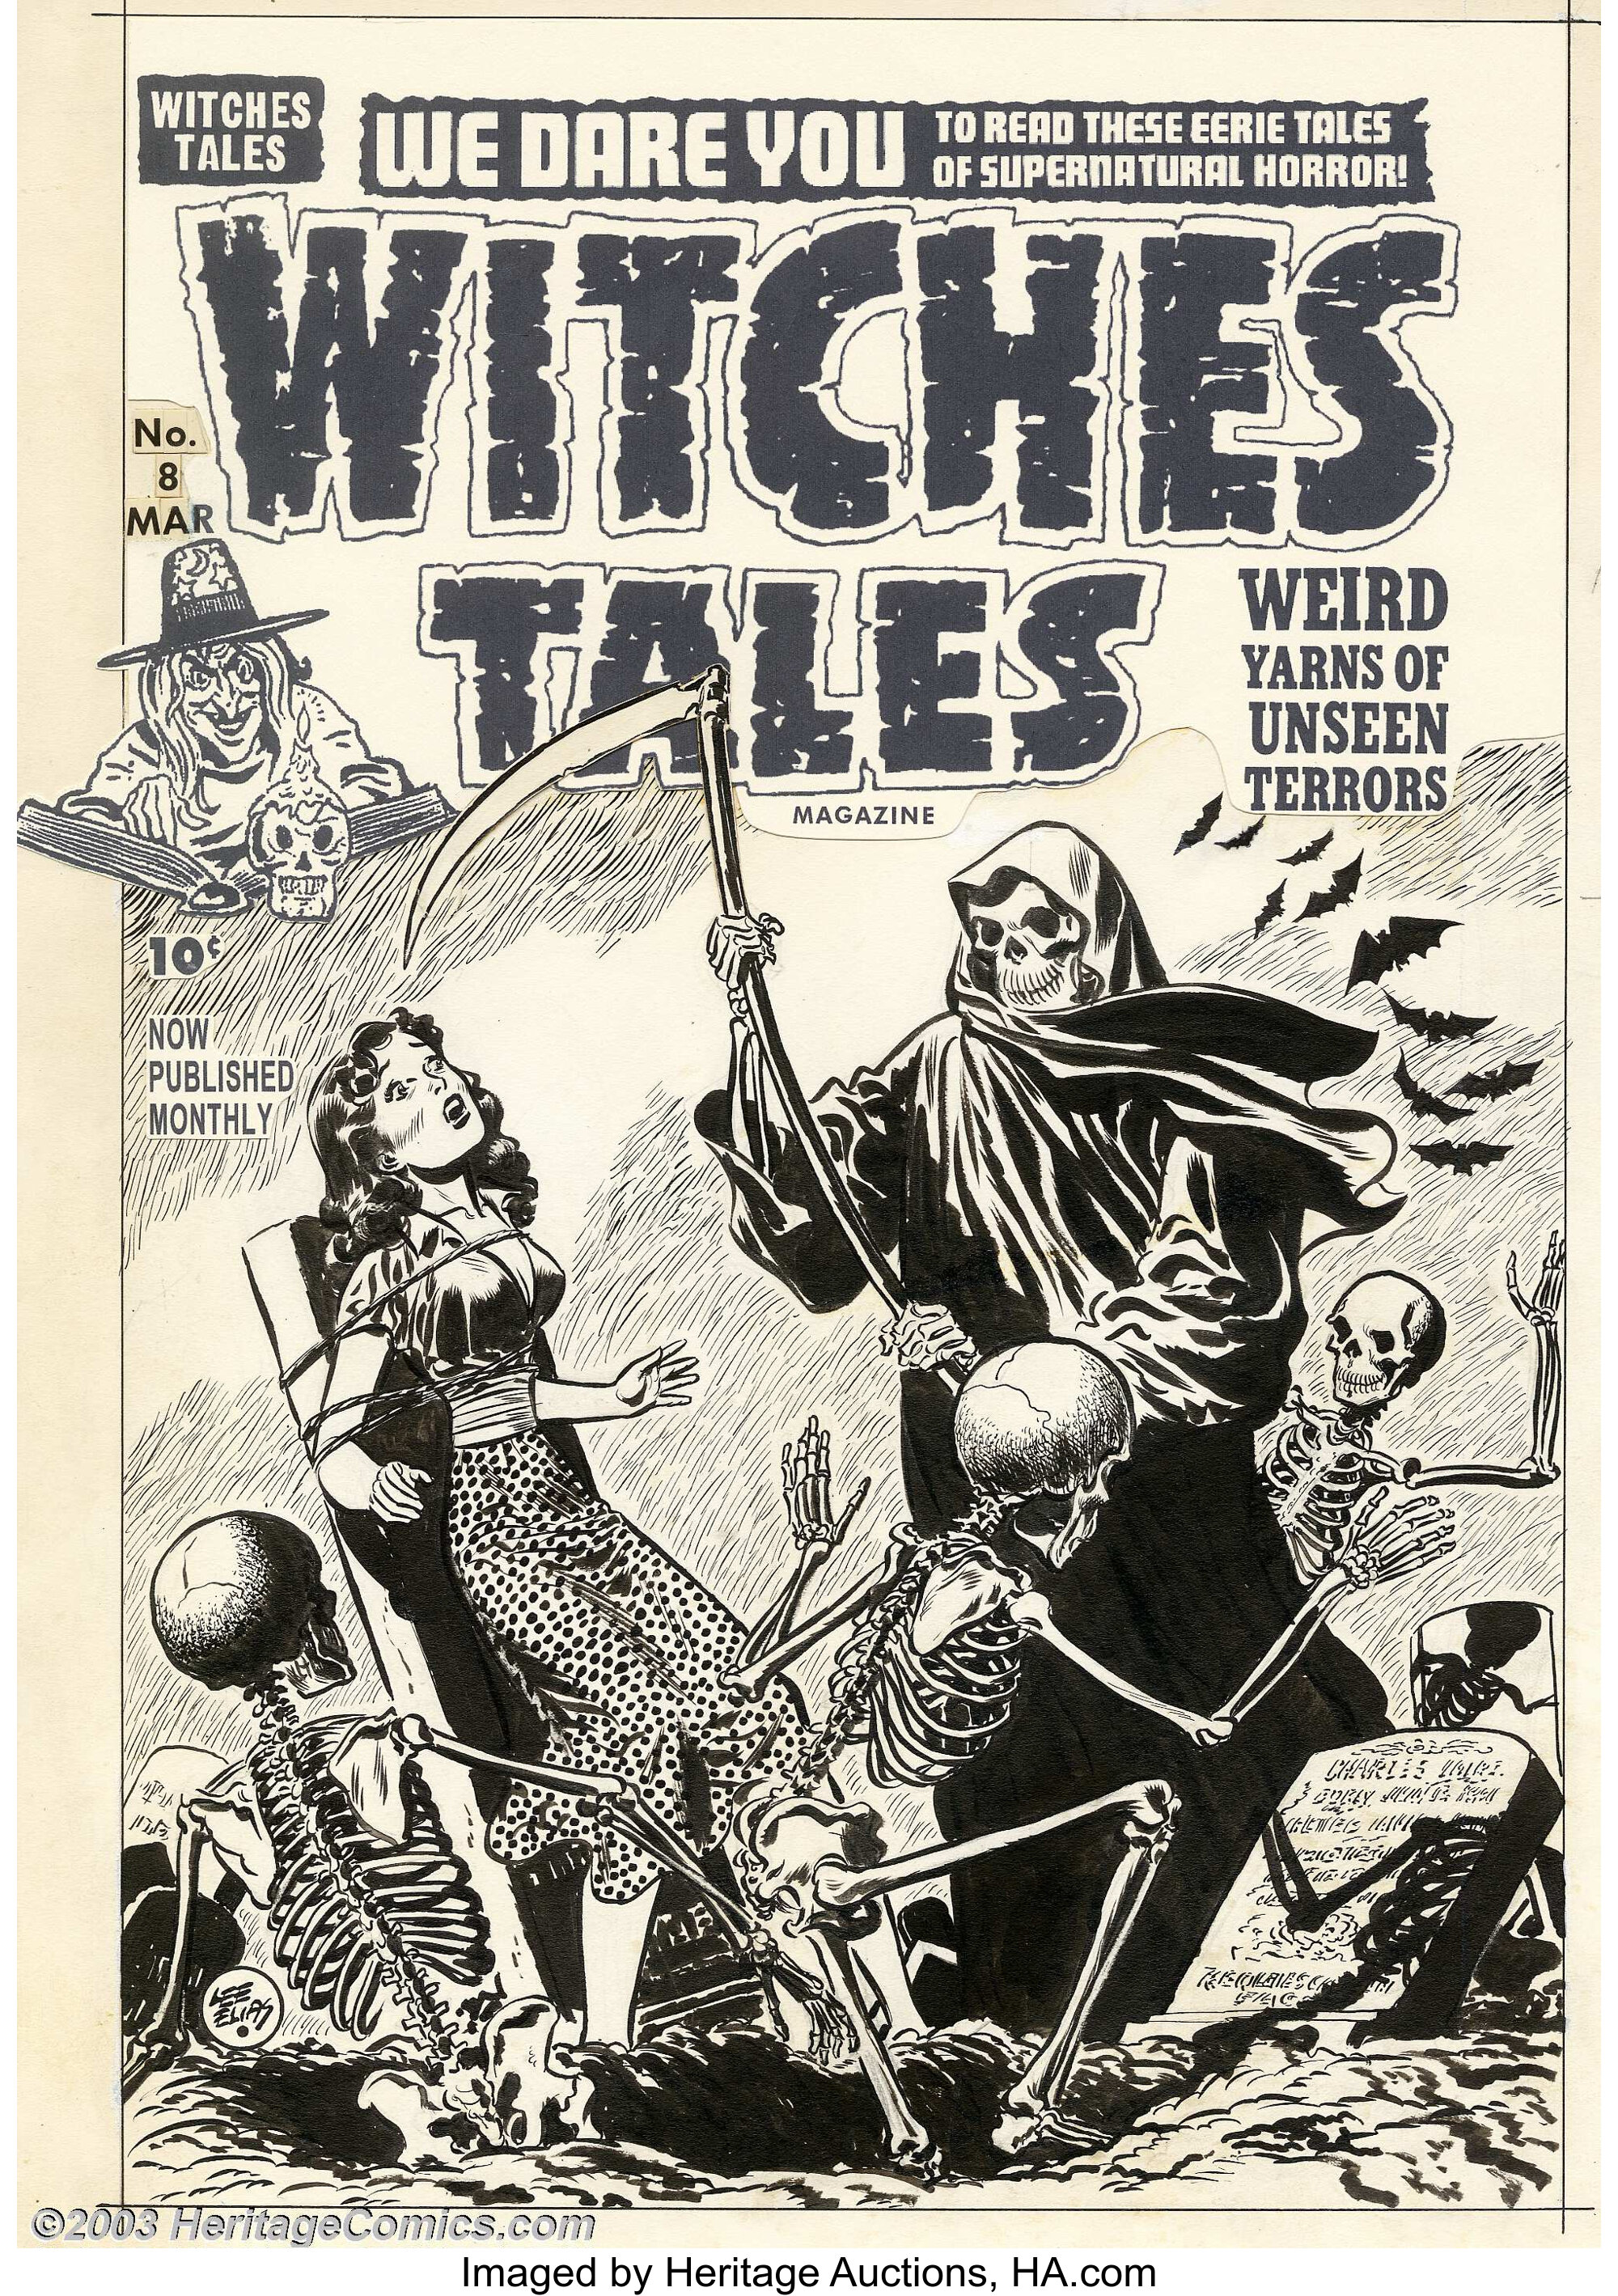 Lee Elias - Original Cover Art for Witches Tales #8 (Harvey, 1952). | Lot  #17189 | Heritage Auctions